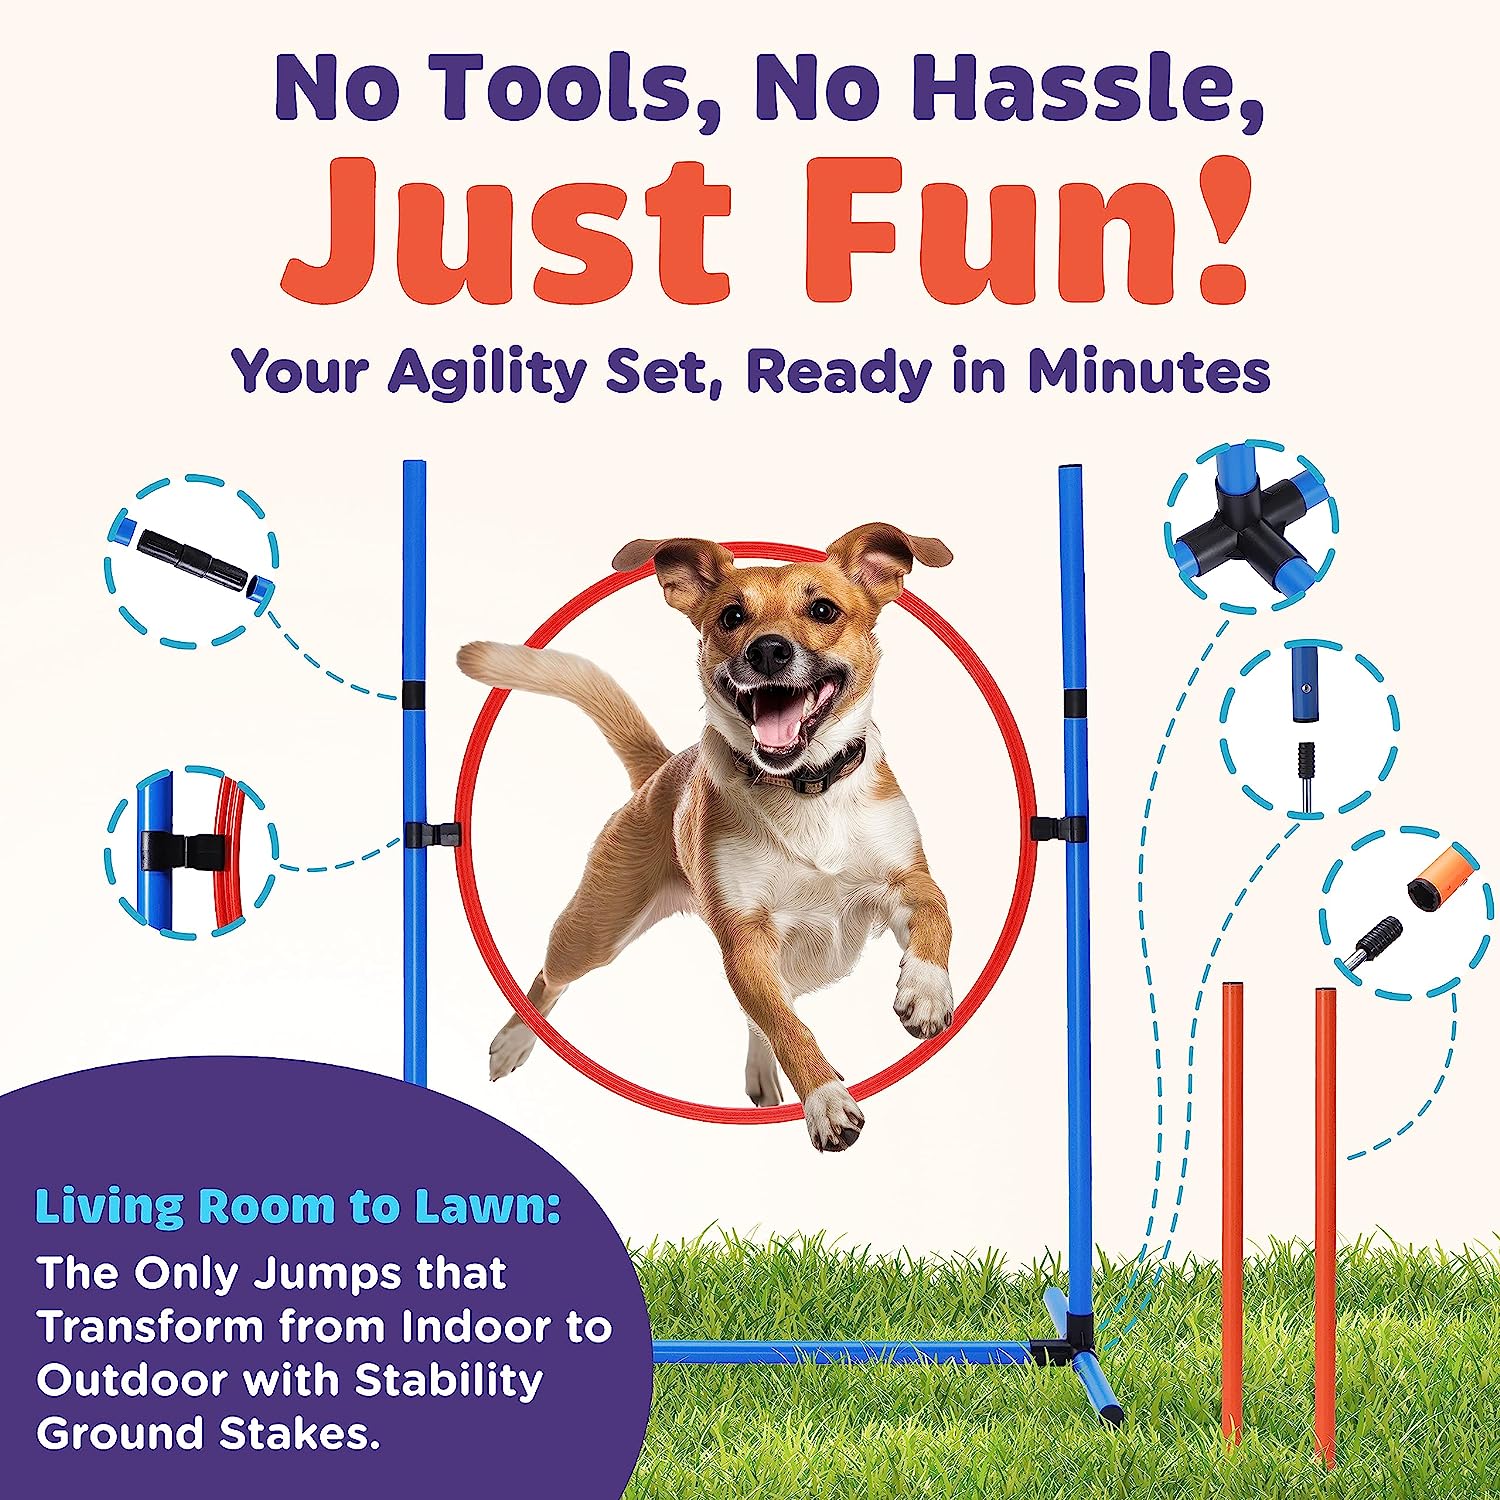 5 Items To Take Your Dog's At-Home Agility Training To The Next